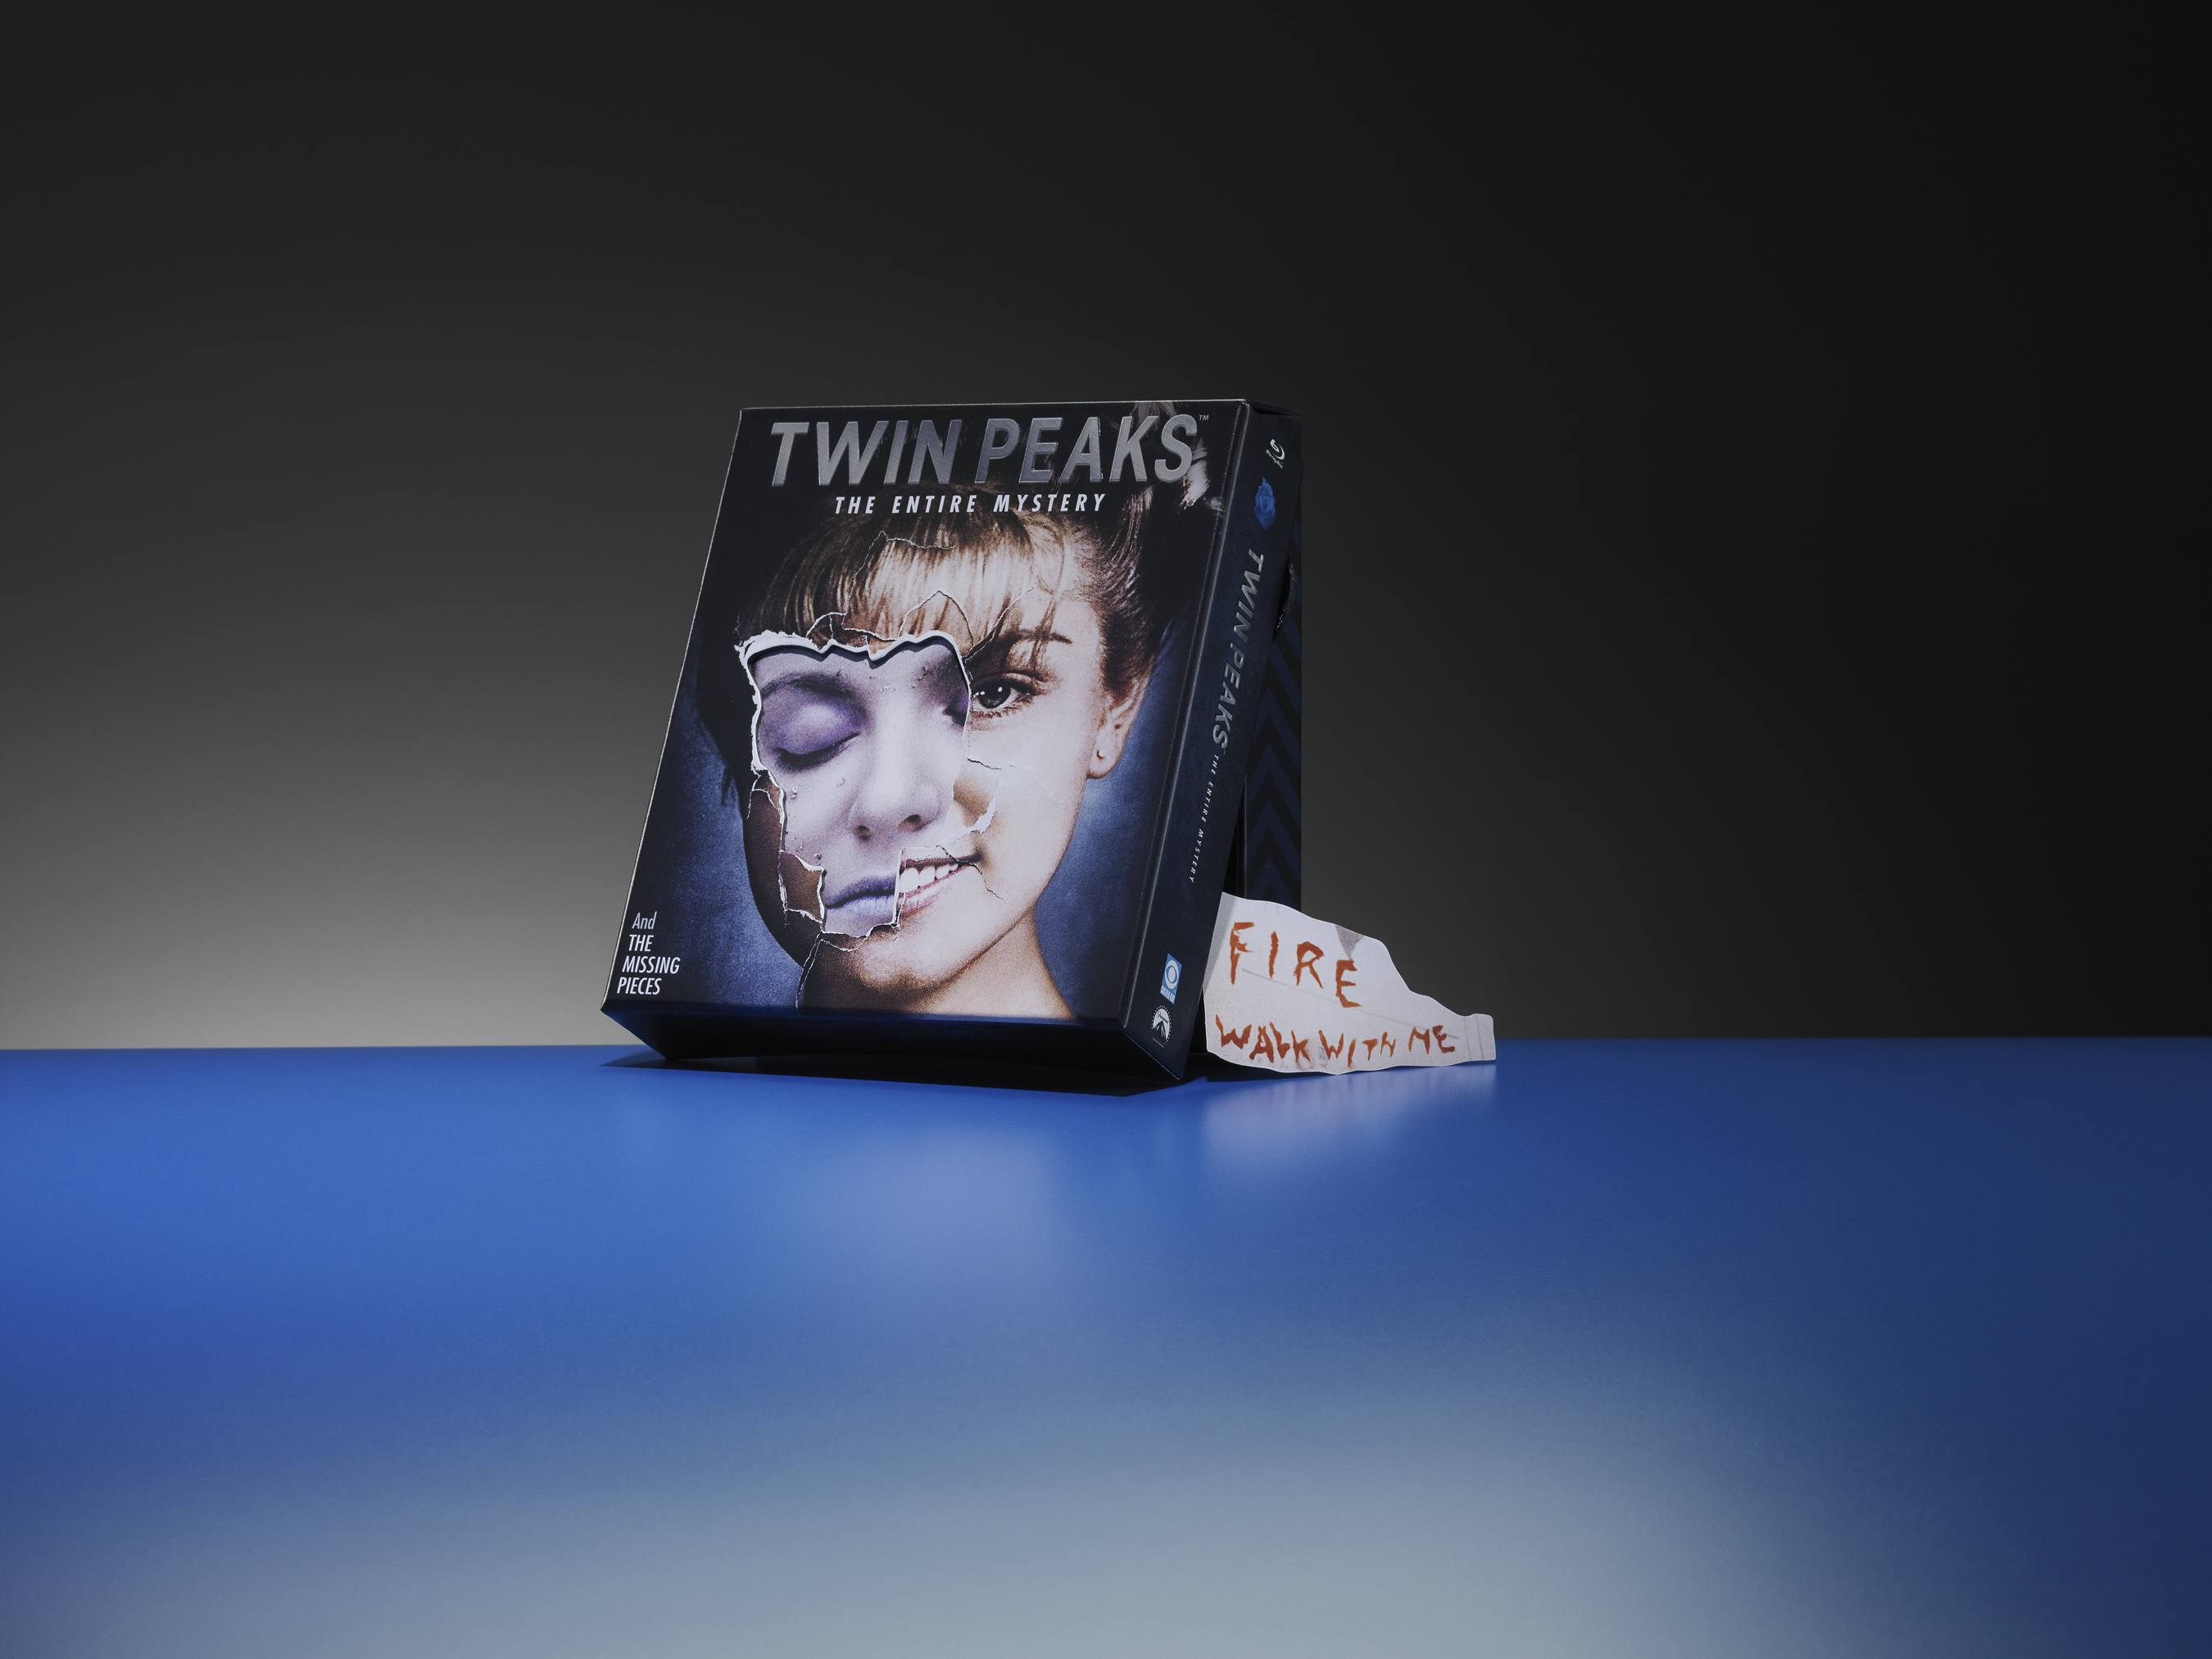 Twin Peaks packaging includes a layered technique that creates the three-dimensional effect